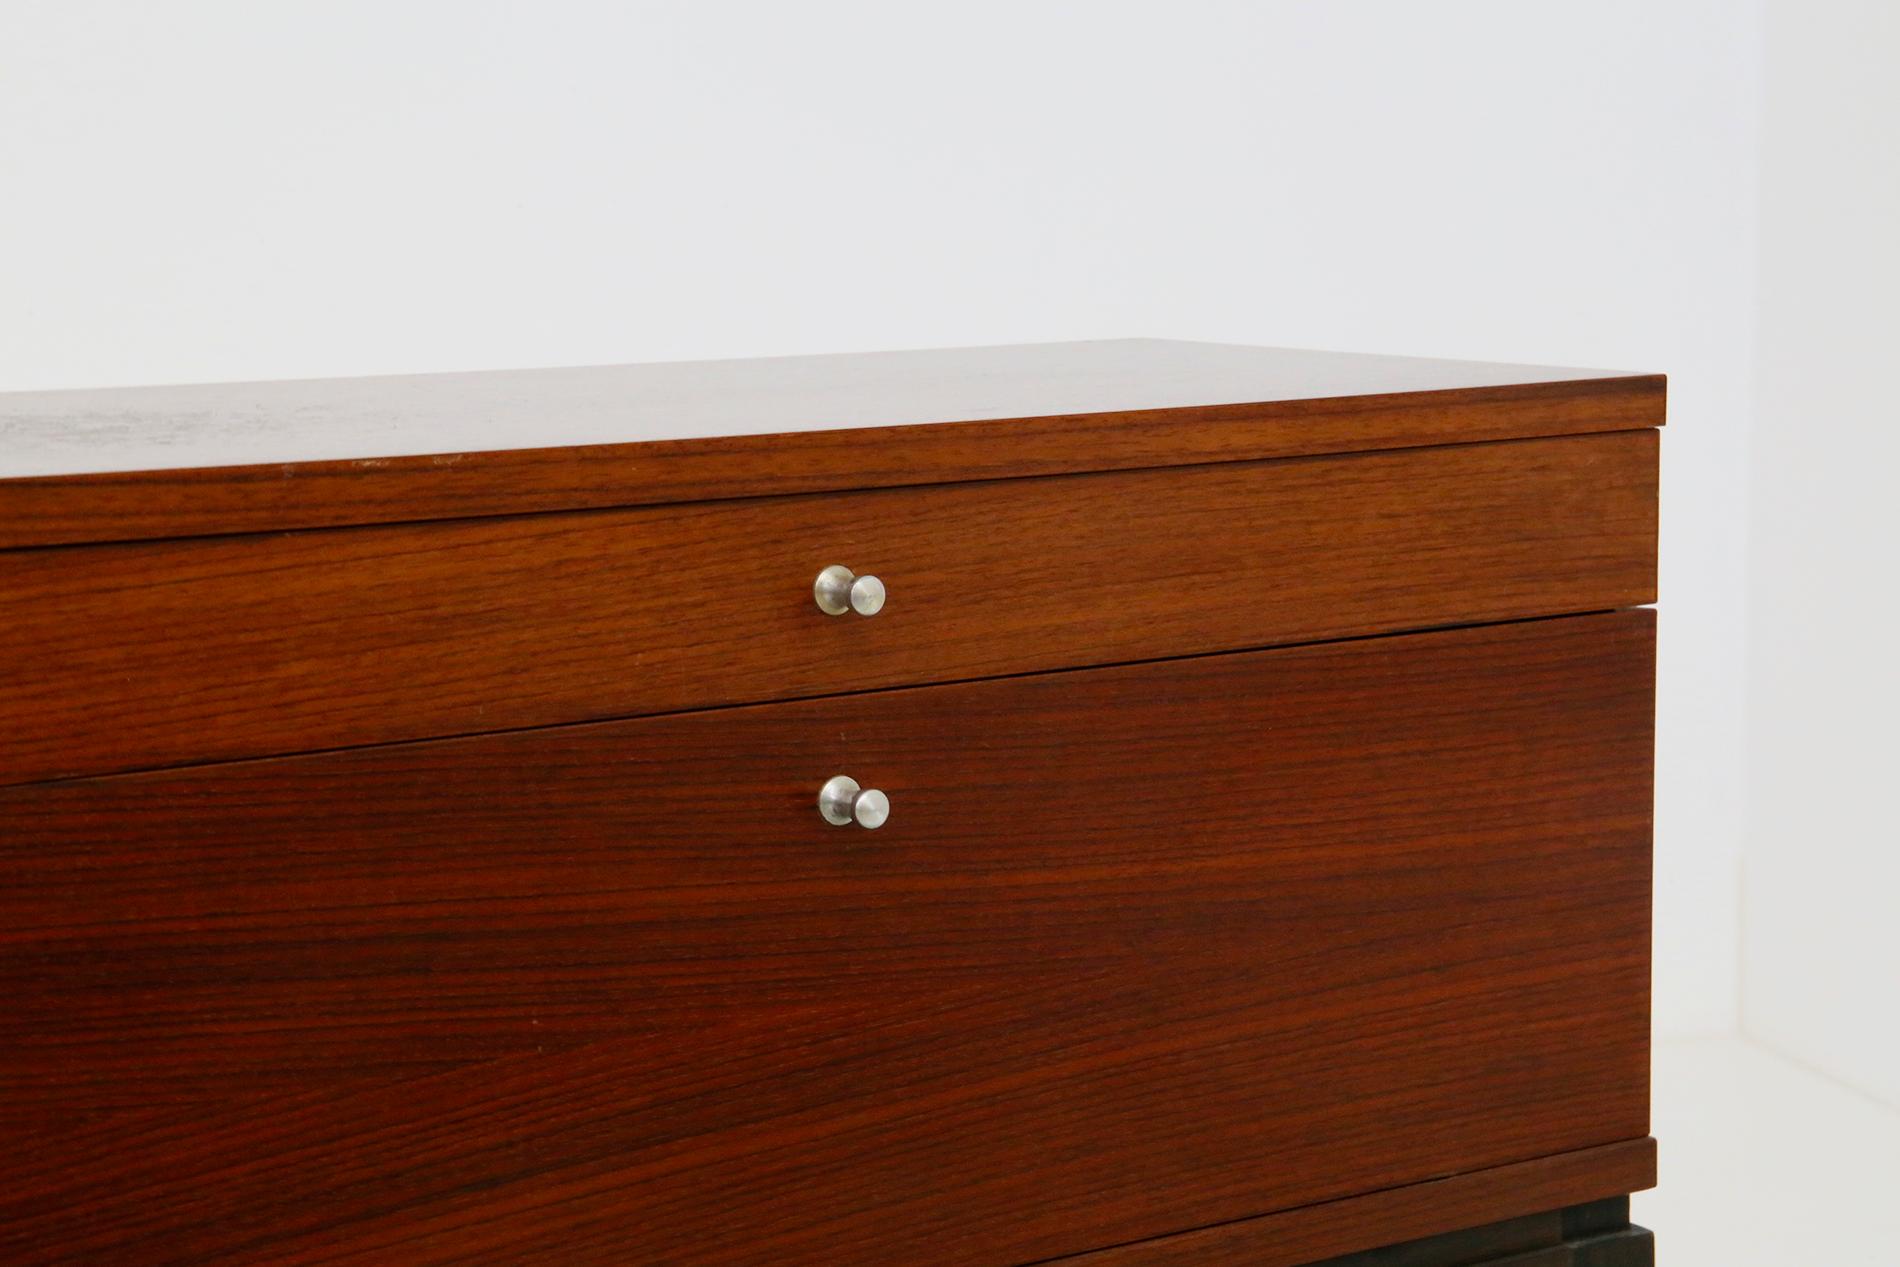 Beautiful pair of bedside tables made by the Italian manufacture MiM in 1960.
The bedside tables were made of rosewood and the feet have a triangular steel plate.
They have two steel knobs to open two drawers, the second drawer opens flaps to hold